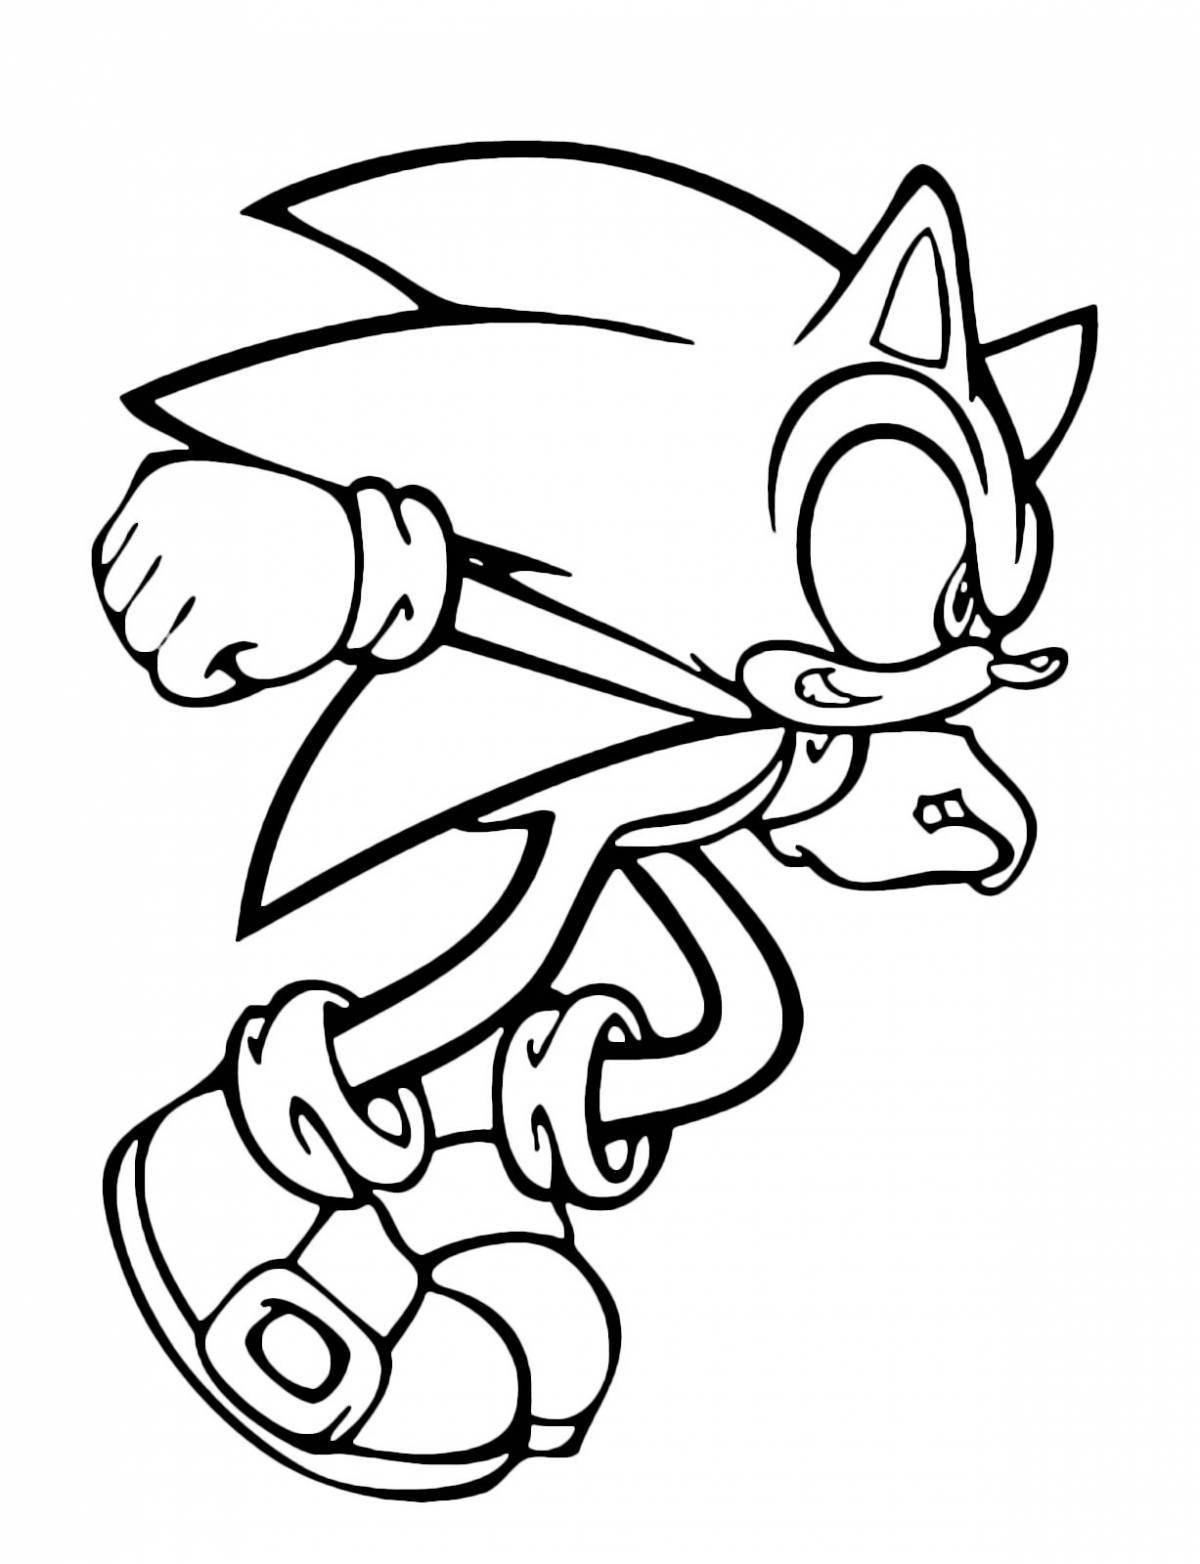 Coloring bright baby sonic